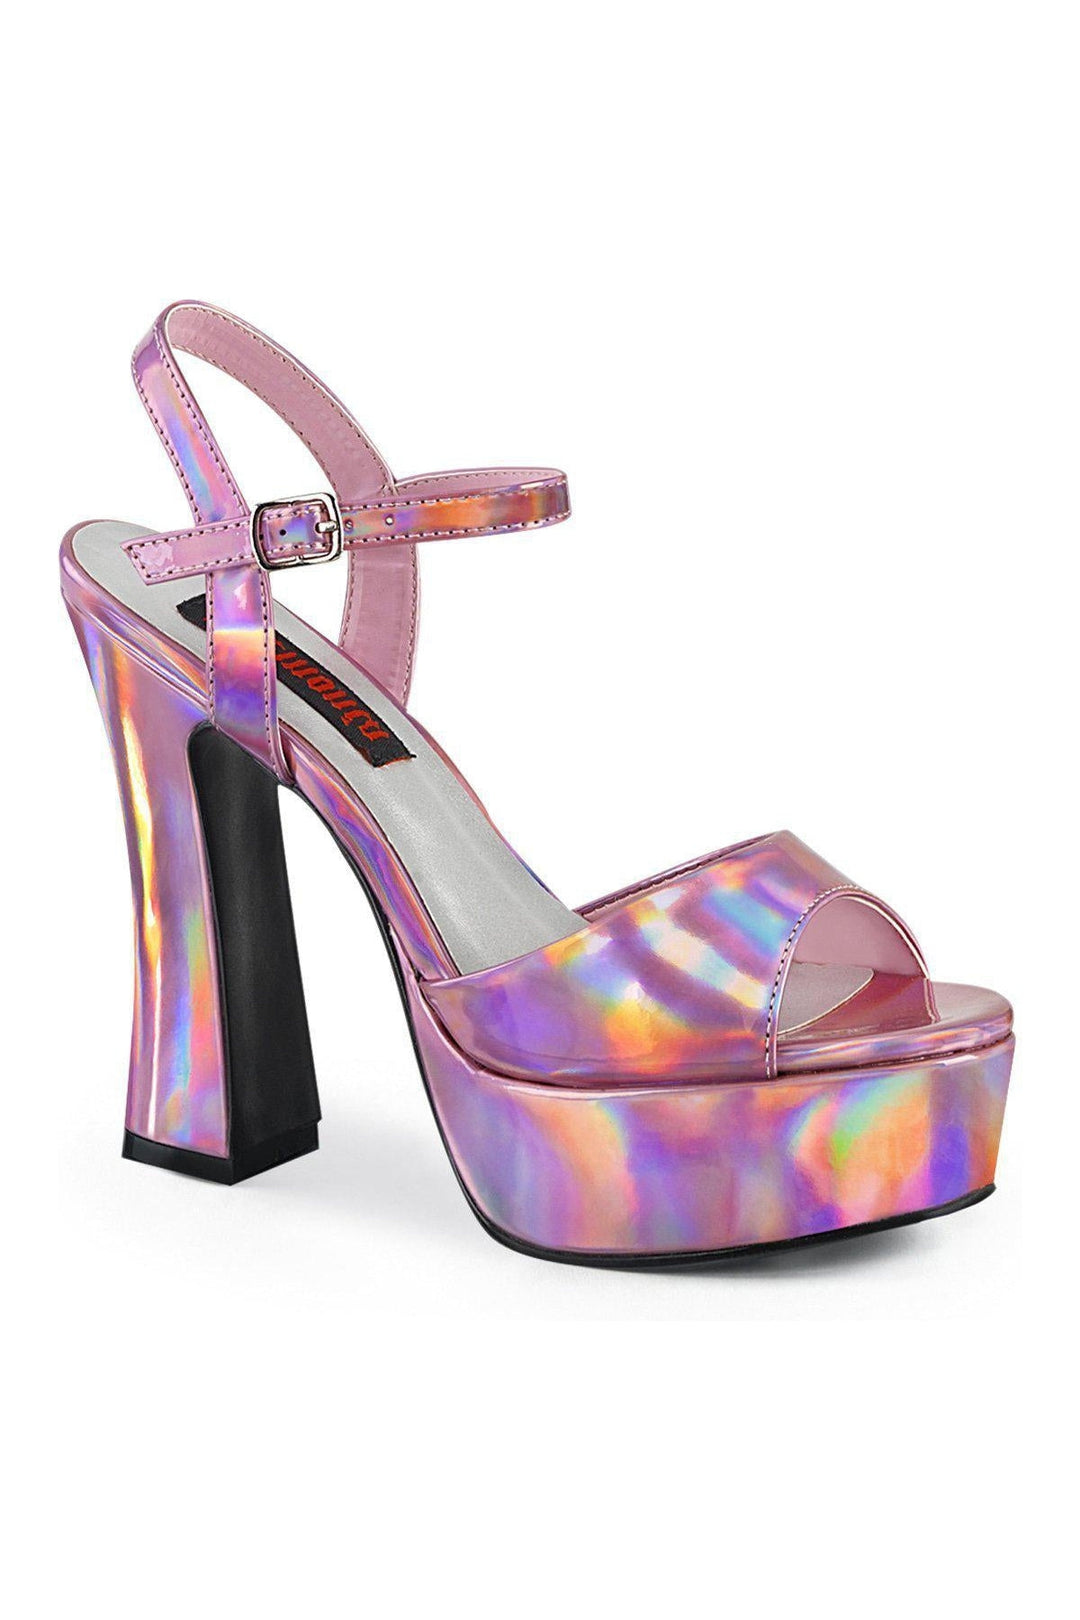 DOLLY-09 Ankle Boot | Hologram Patent-Ankle Boots-Demonia-SEXYSHOES.COM